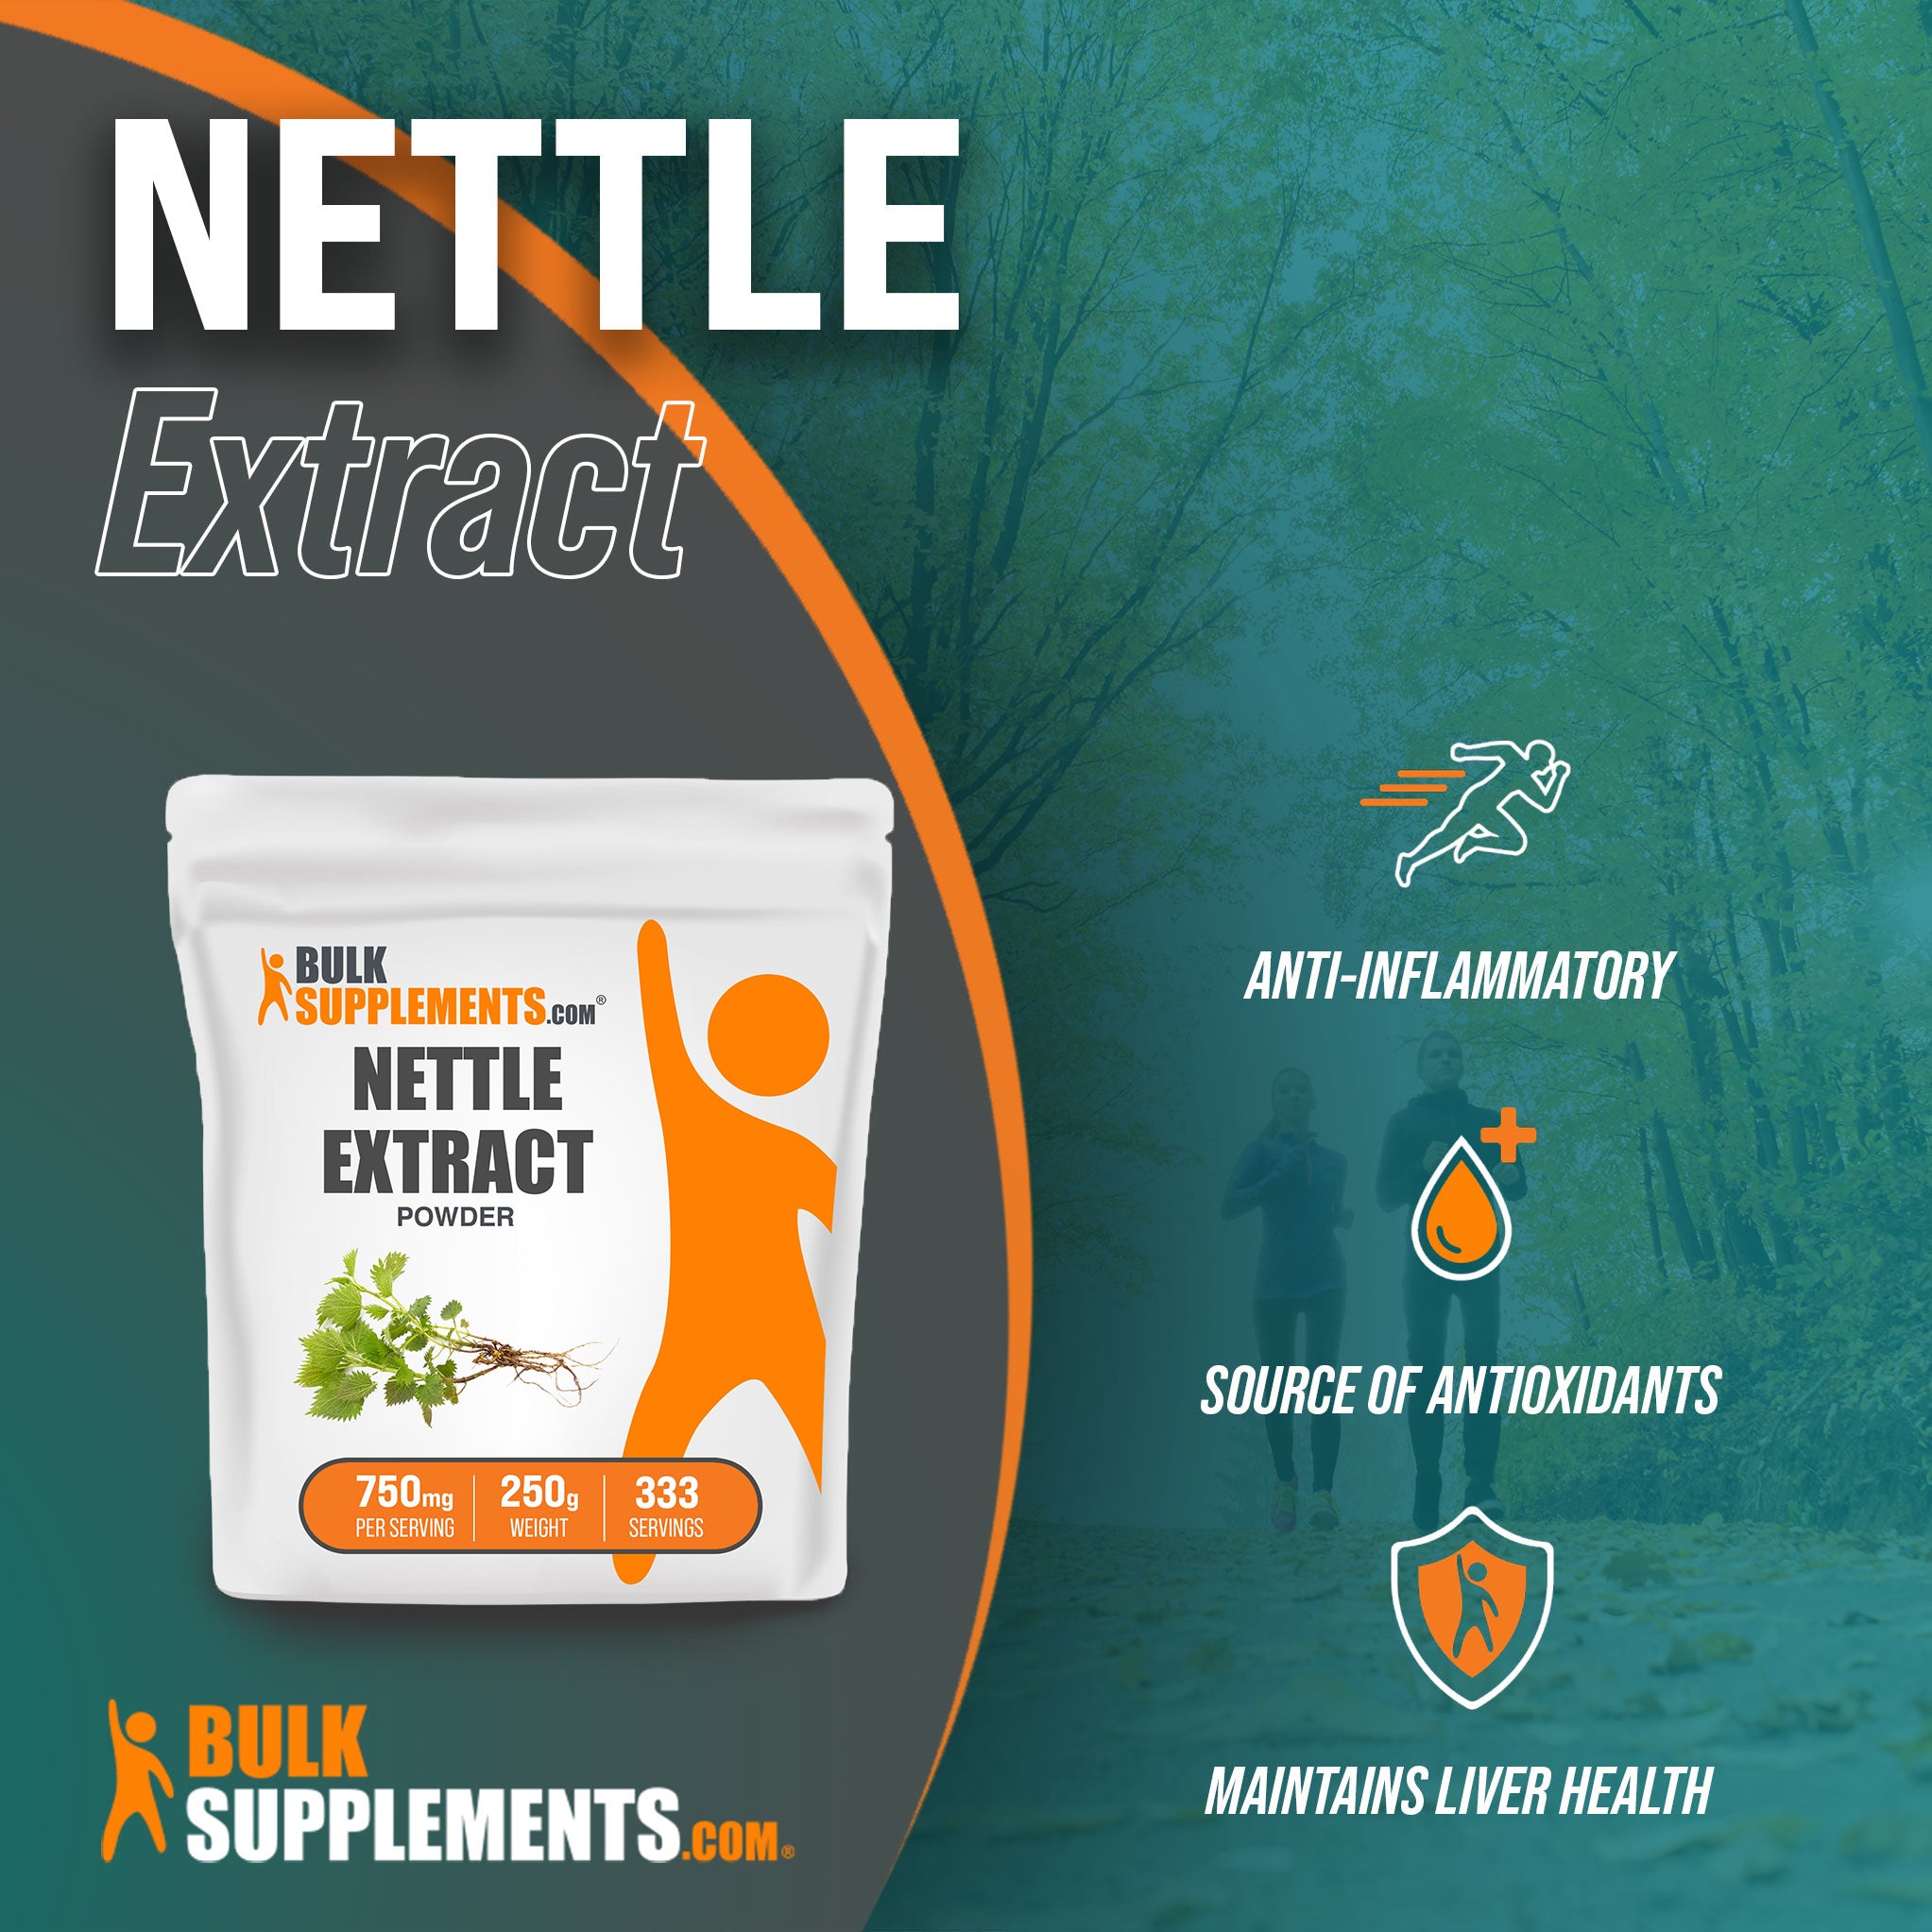 Benefits of Nettle Extract: anti-inflammatory, source of antioxidants, maintains liver health